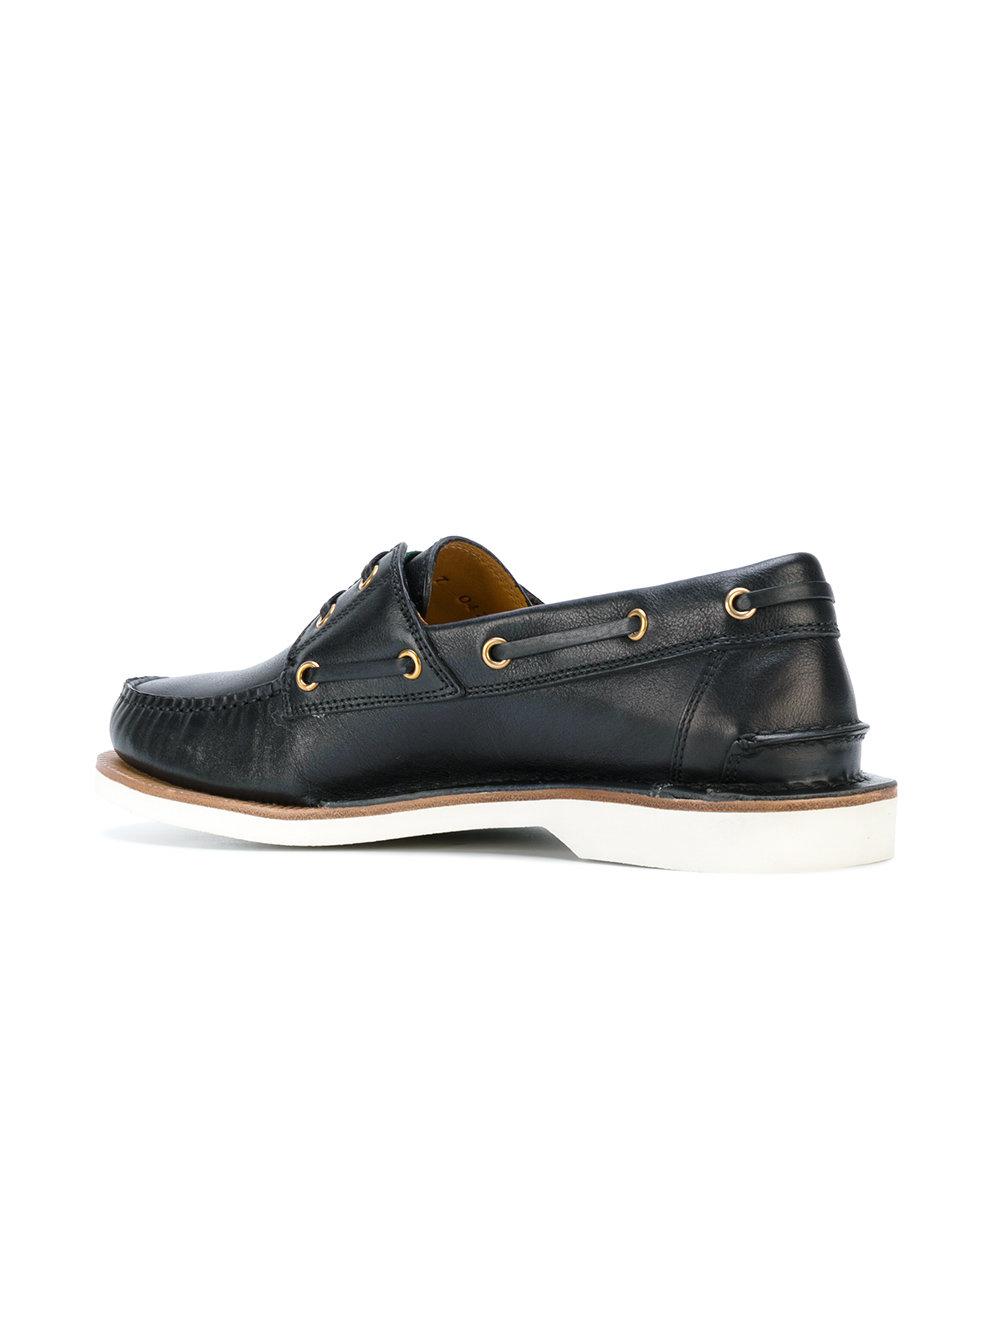 Gucci Leather Boat Shoes in Blue for Men - Lyst